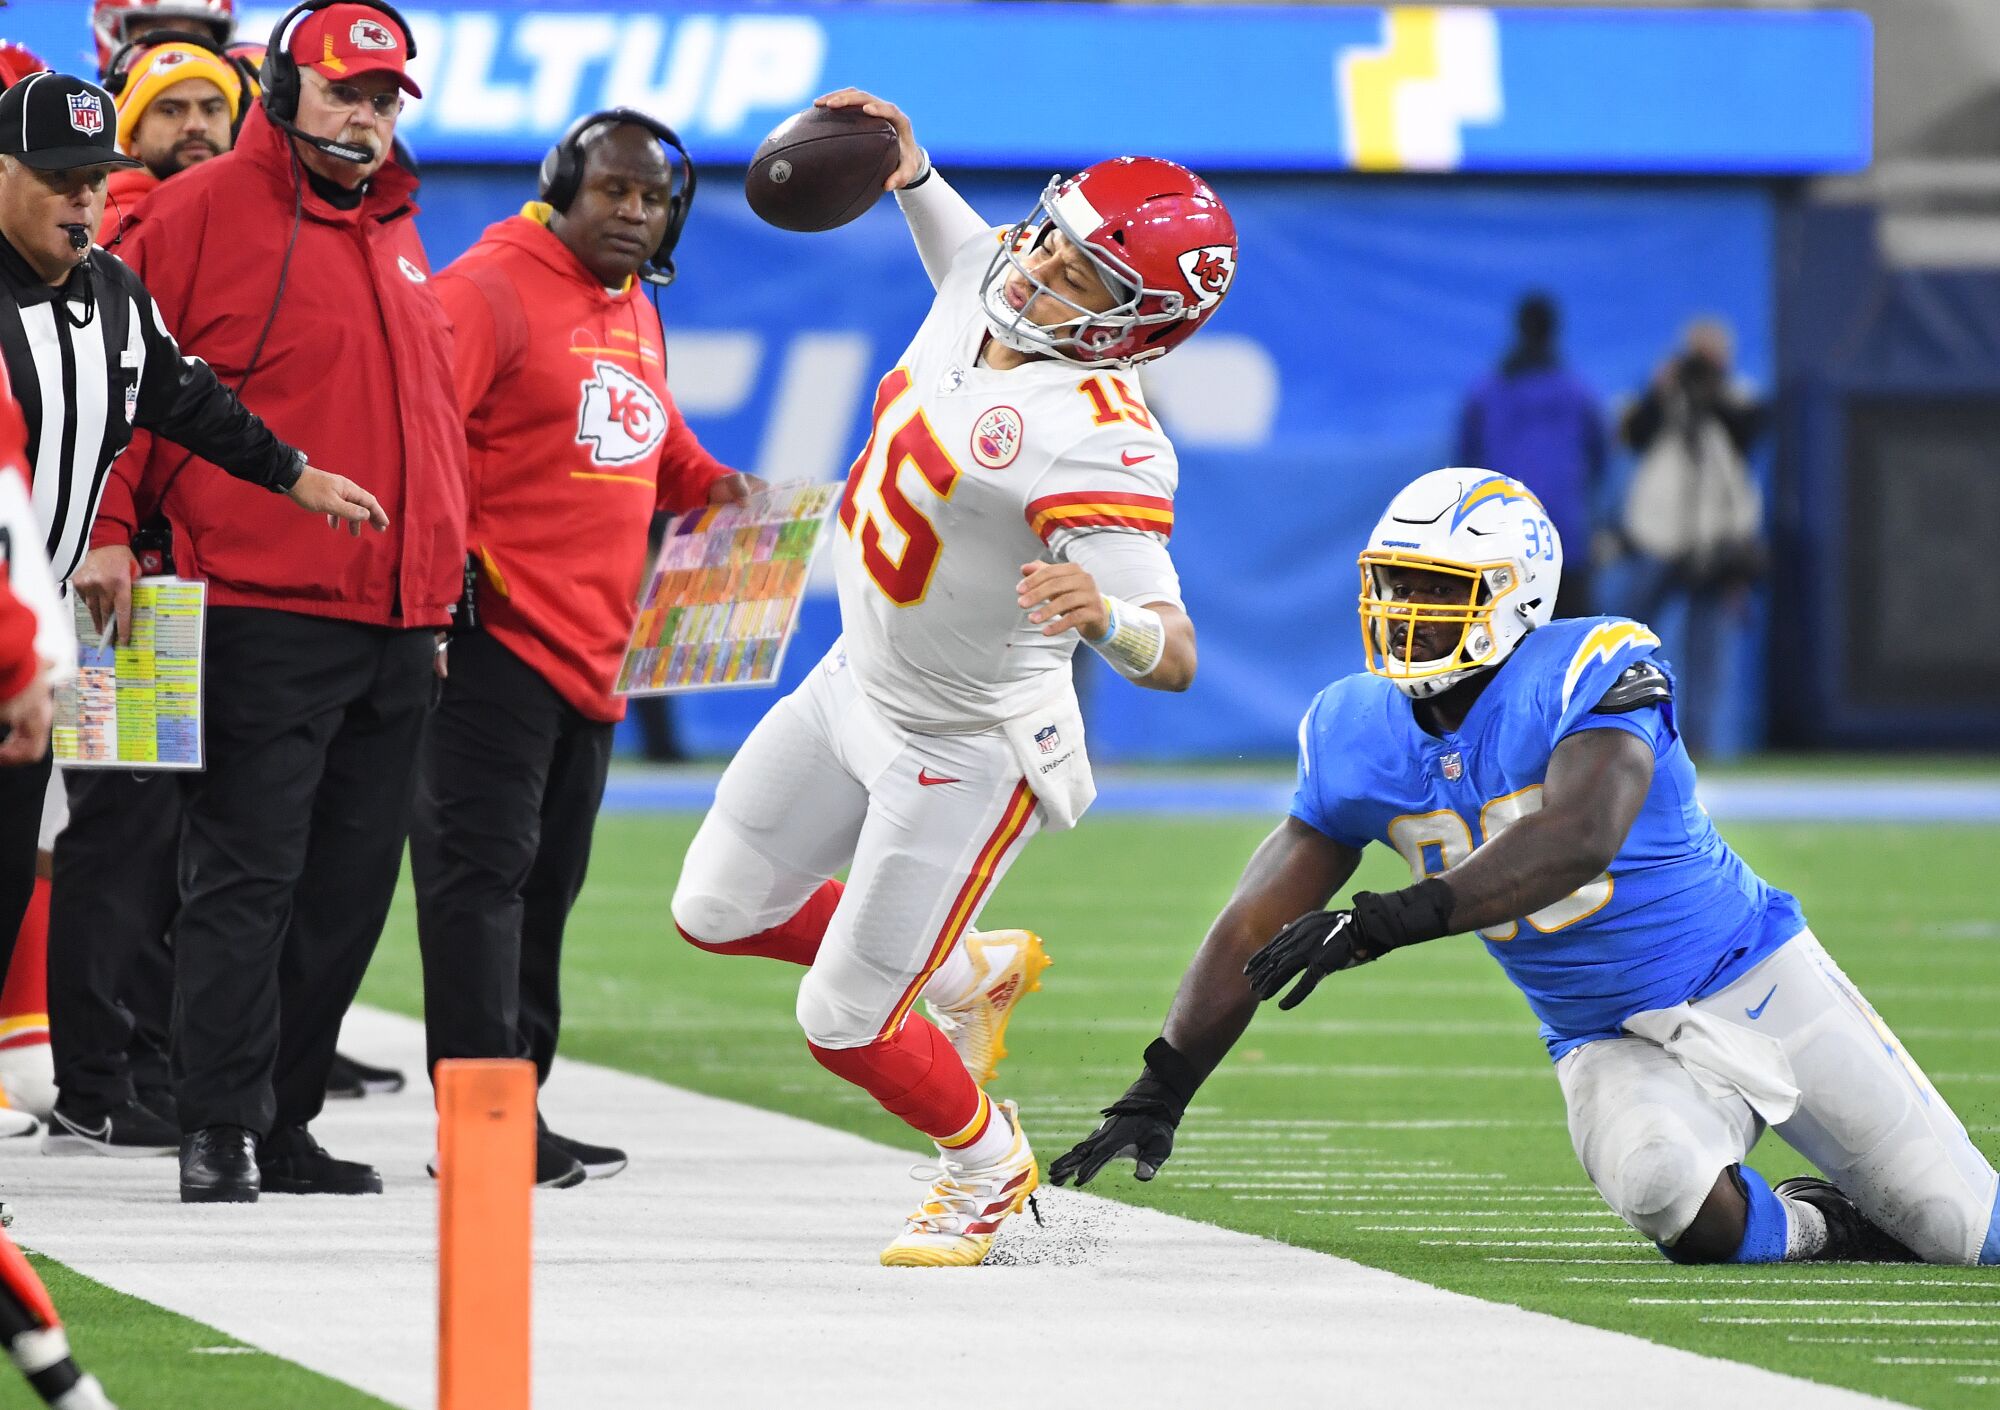 Chiefs quarterback Patrick Maholmes is pushed out of bounds by Chargers defensive lineman Justin Jones.